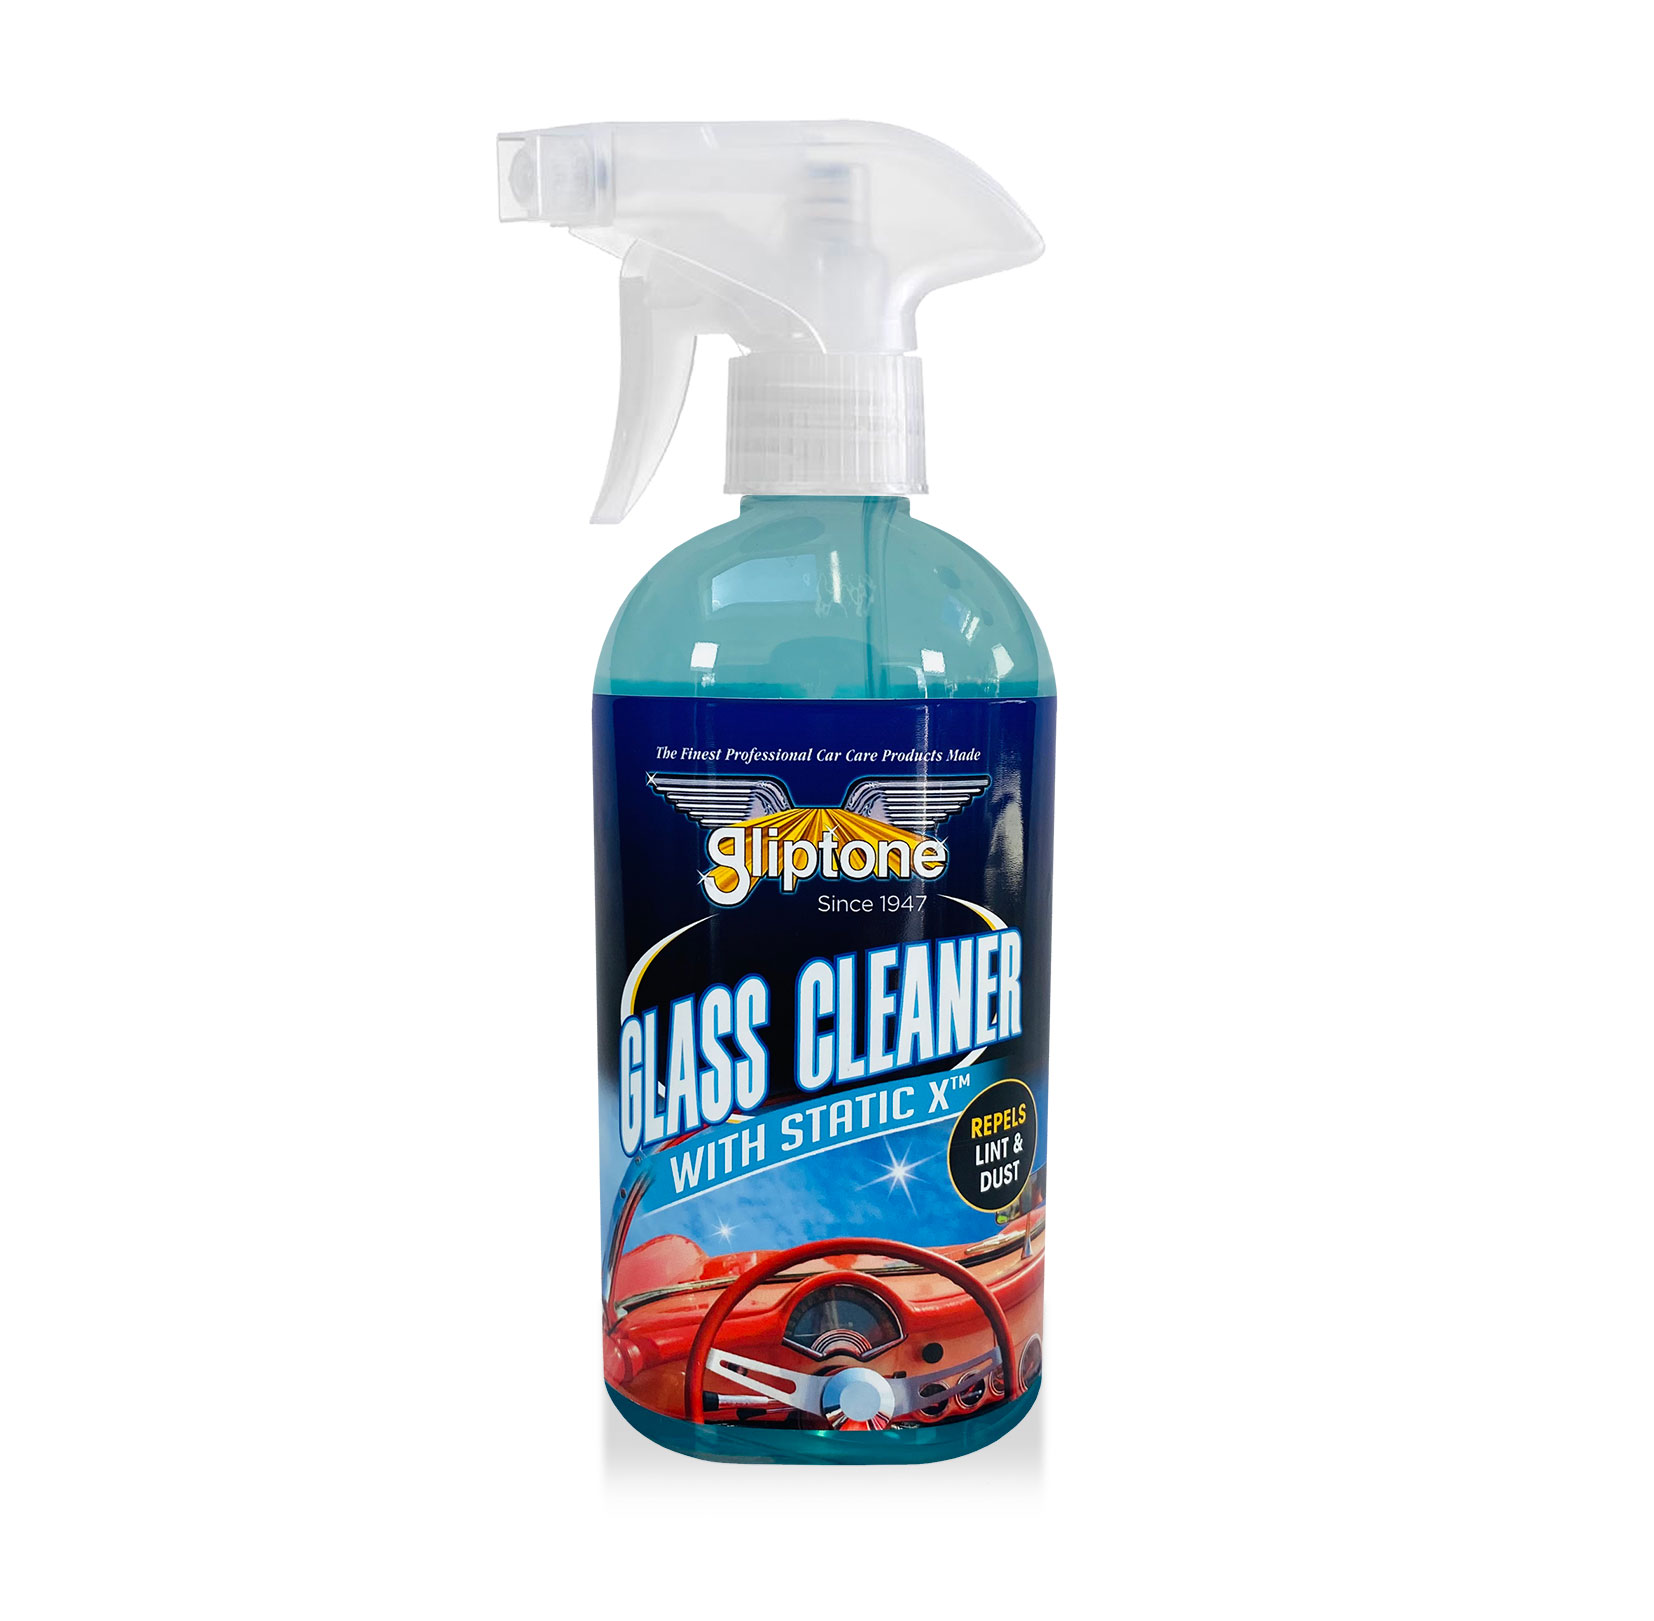 Glass Stripper: How to Deep Clean a Windshield on Vimeo